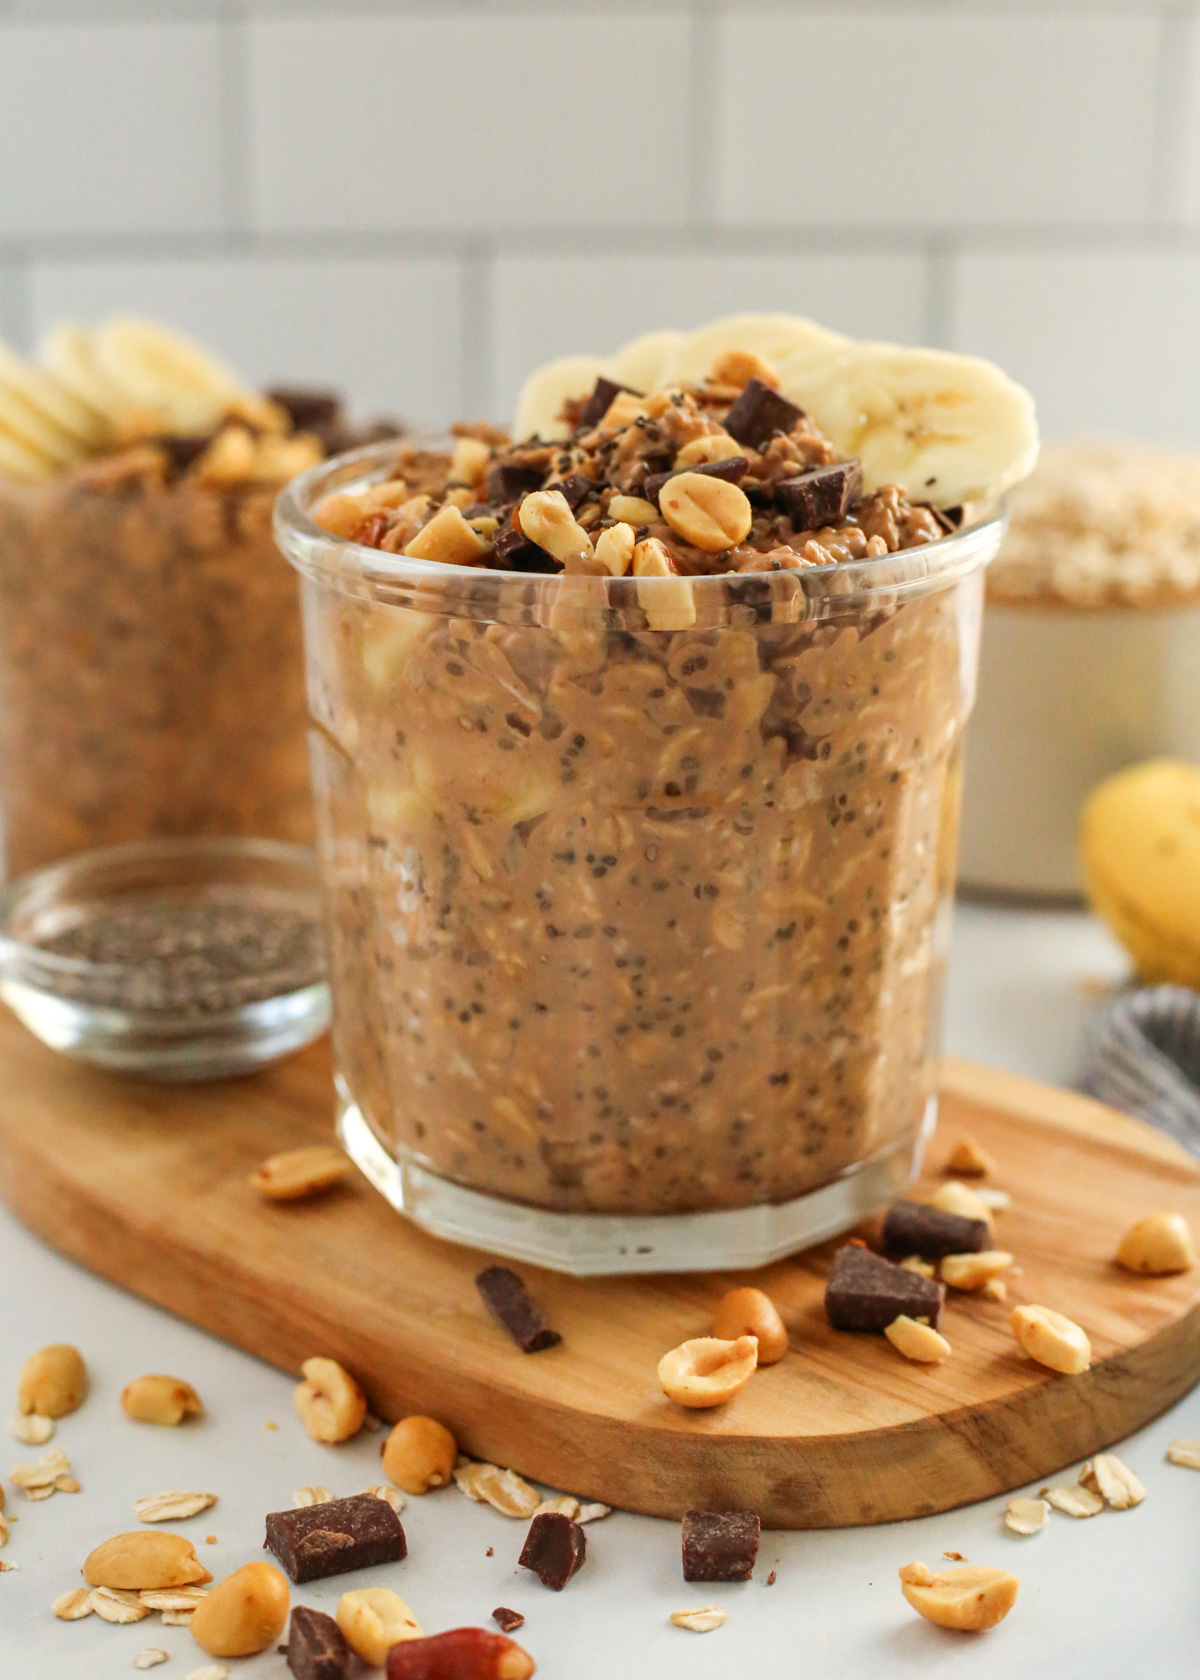 A glass mason jar holds a heaping portion of chocolate banana overnight oats, which are garnished with crushed peanuts, chocolate chunks, and slices of bananas, with a second jar visible in the background along with some of the included ingredients